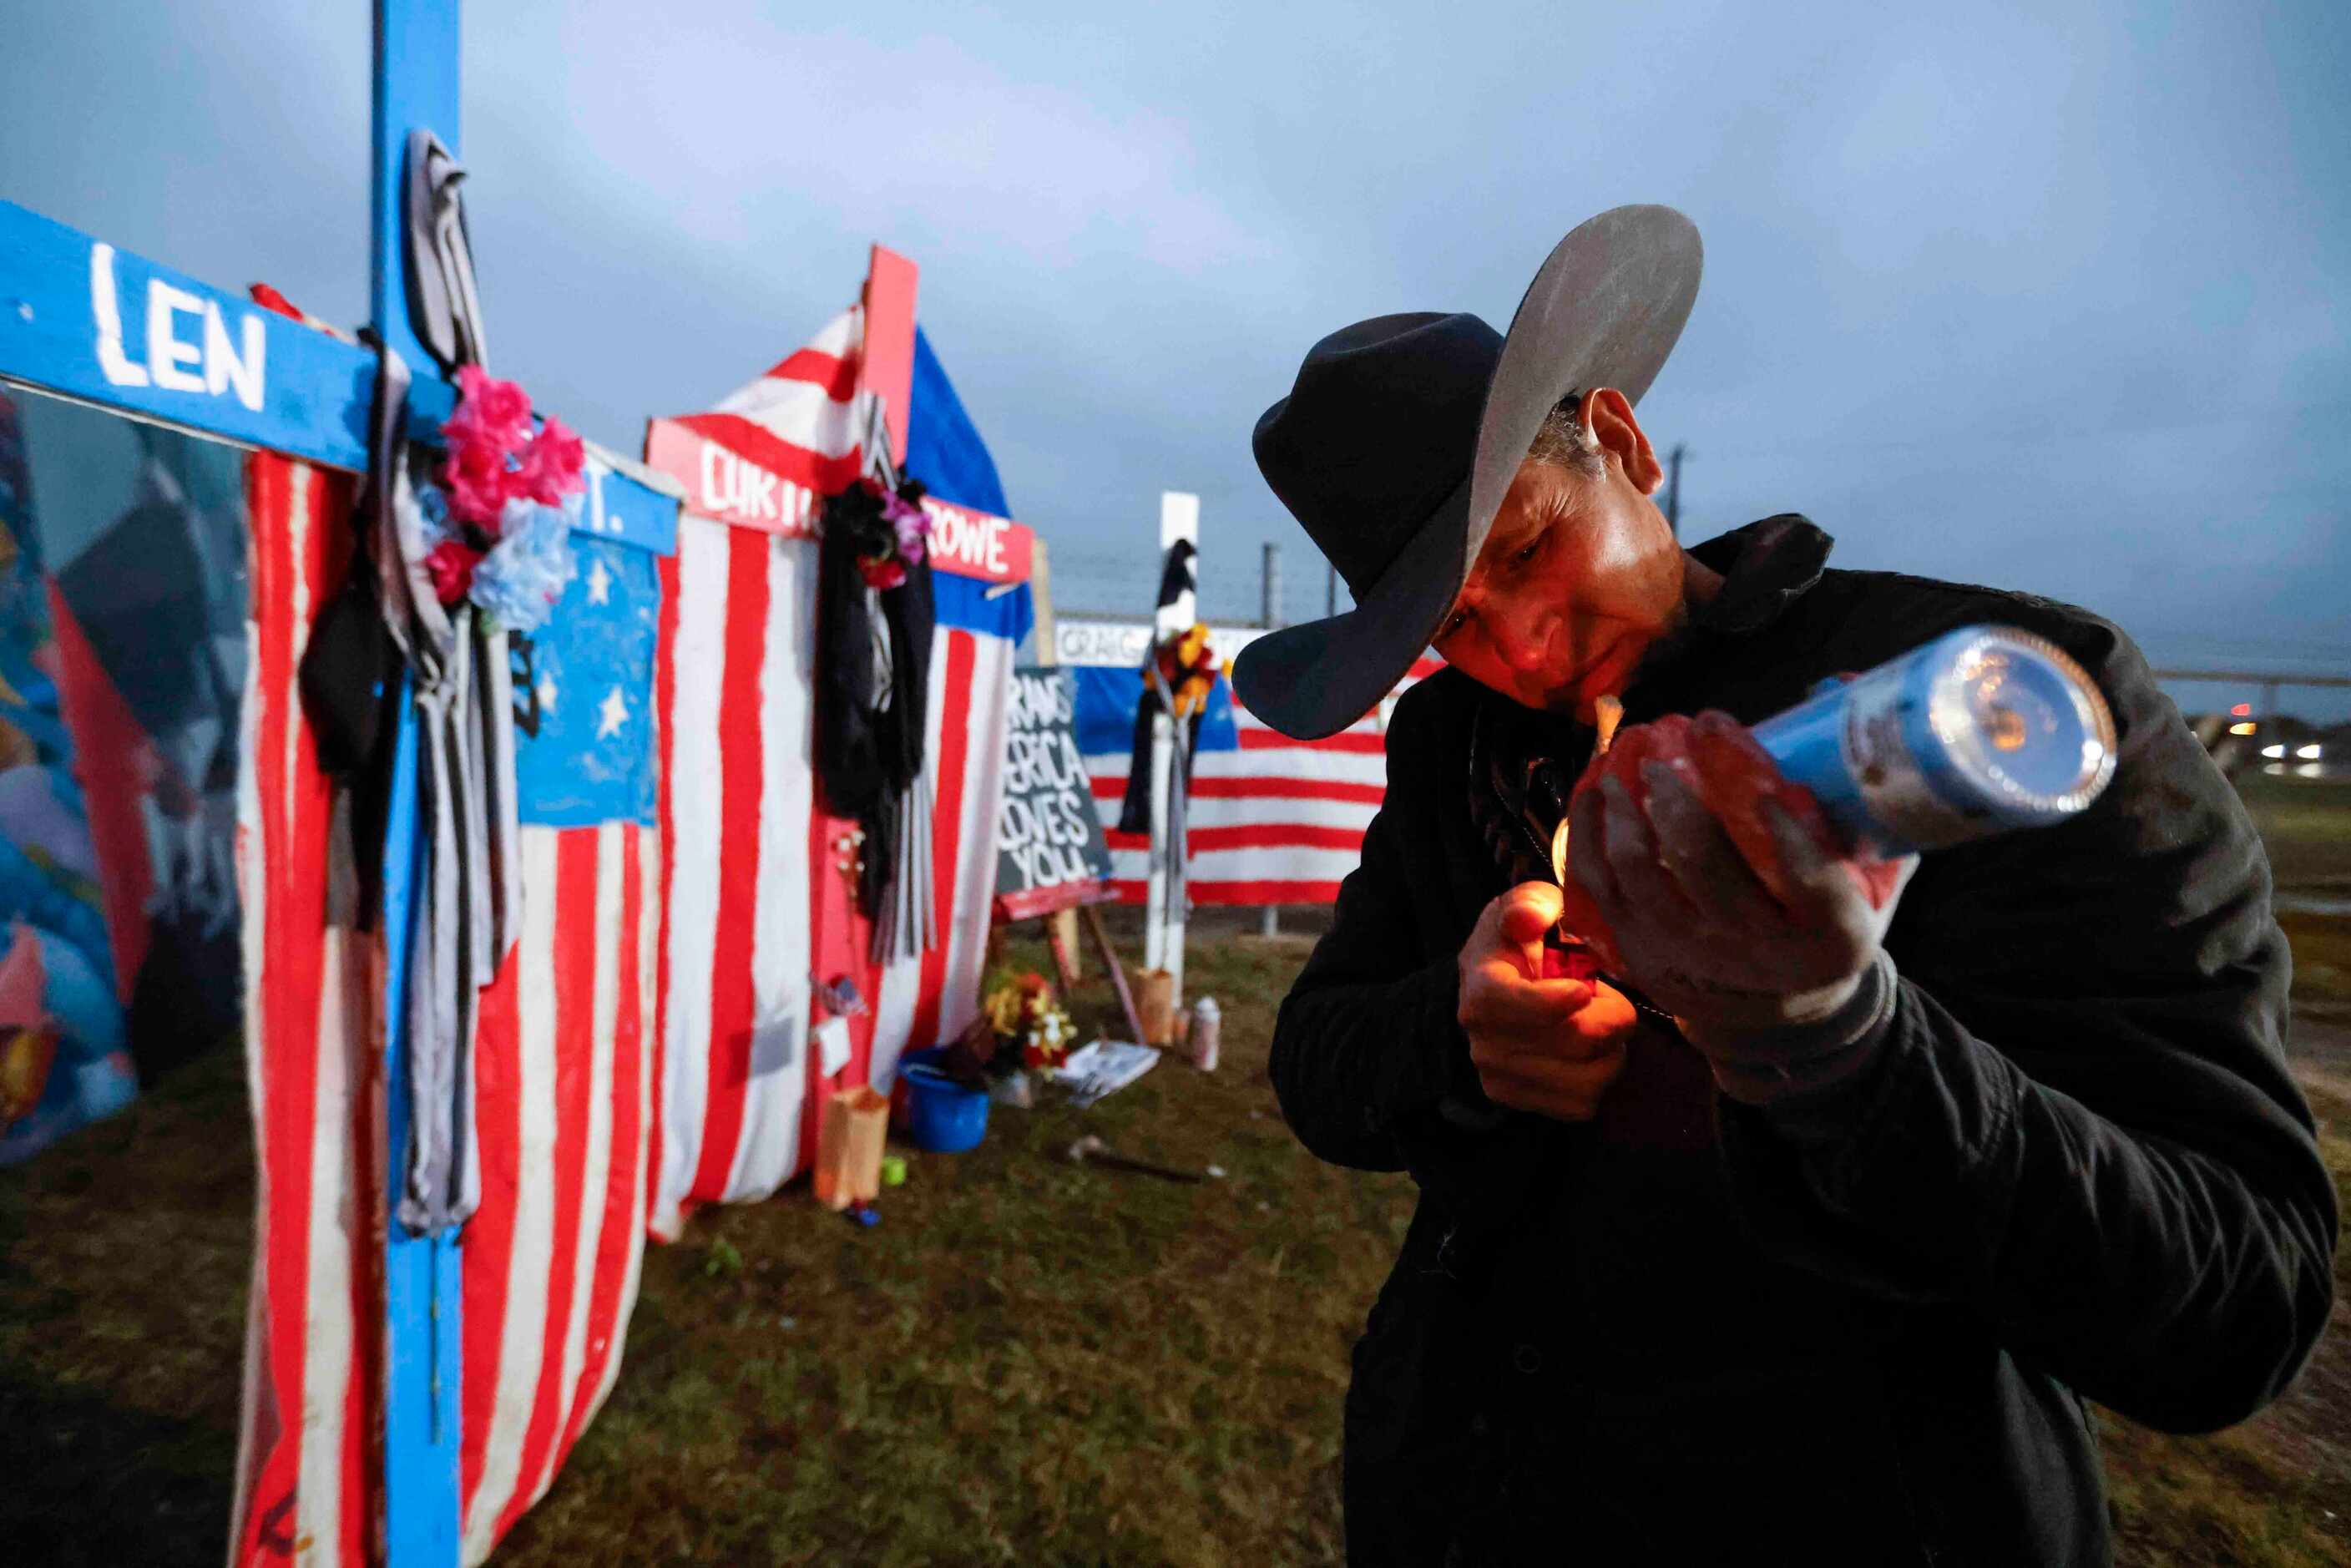 Mural artist Roberto Márquez lights up a candle intended to put on one of the six painted...